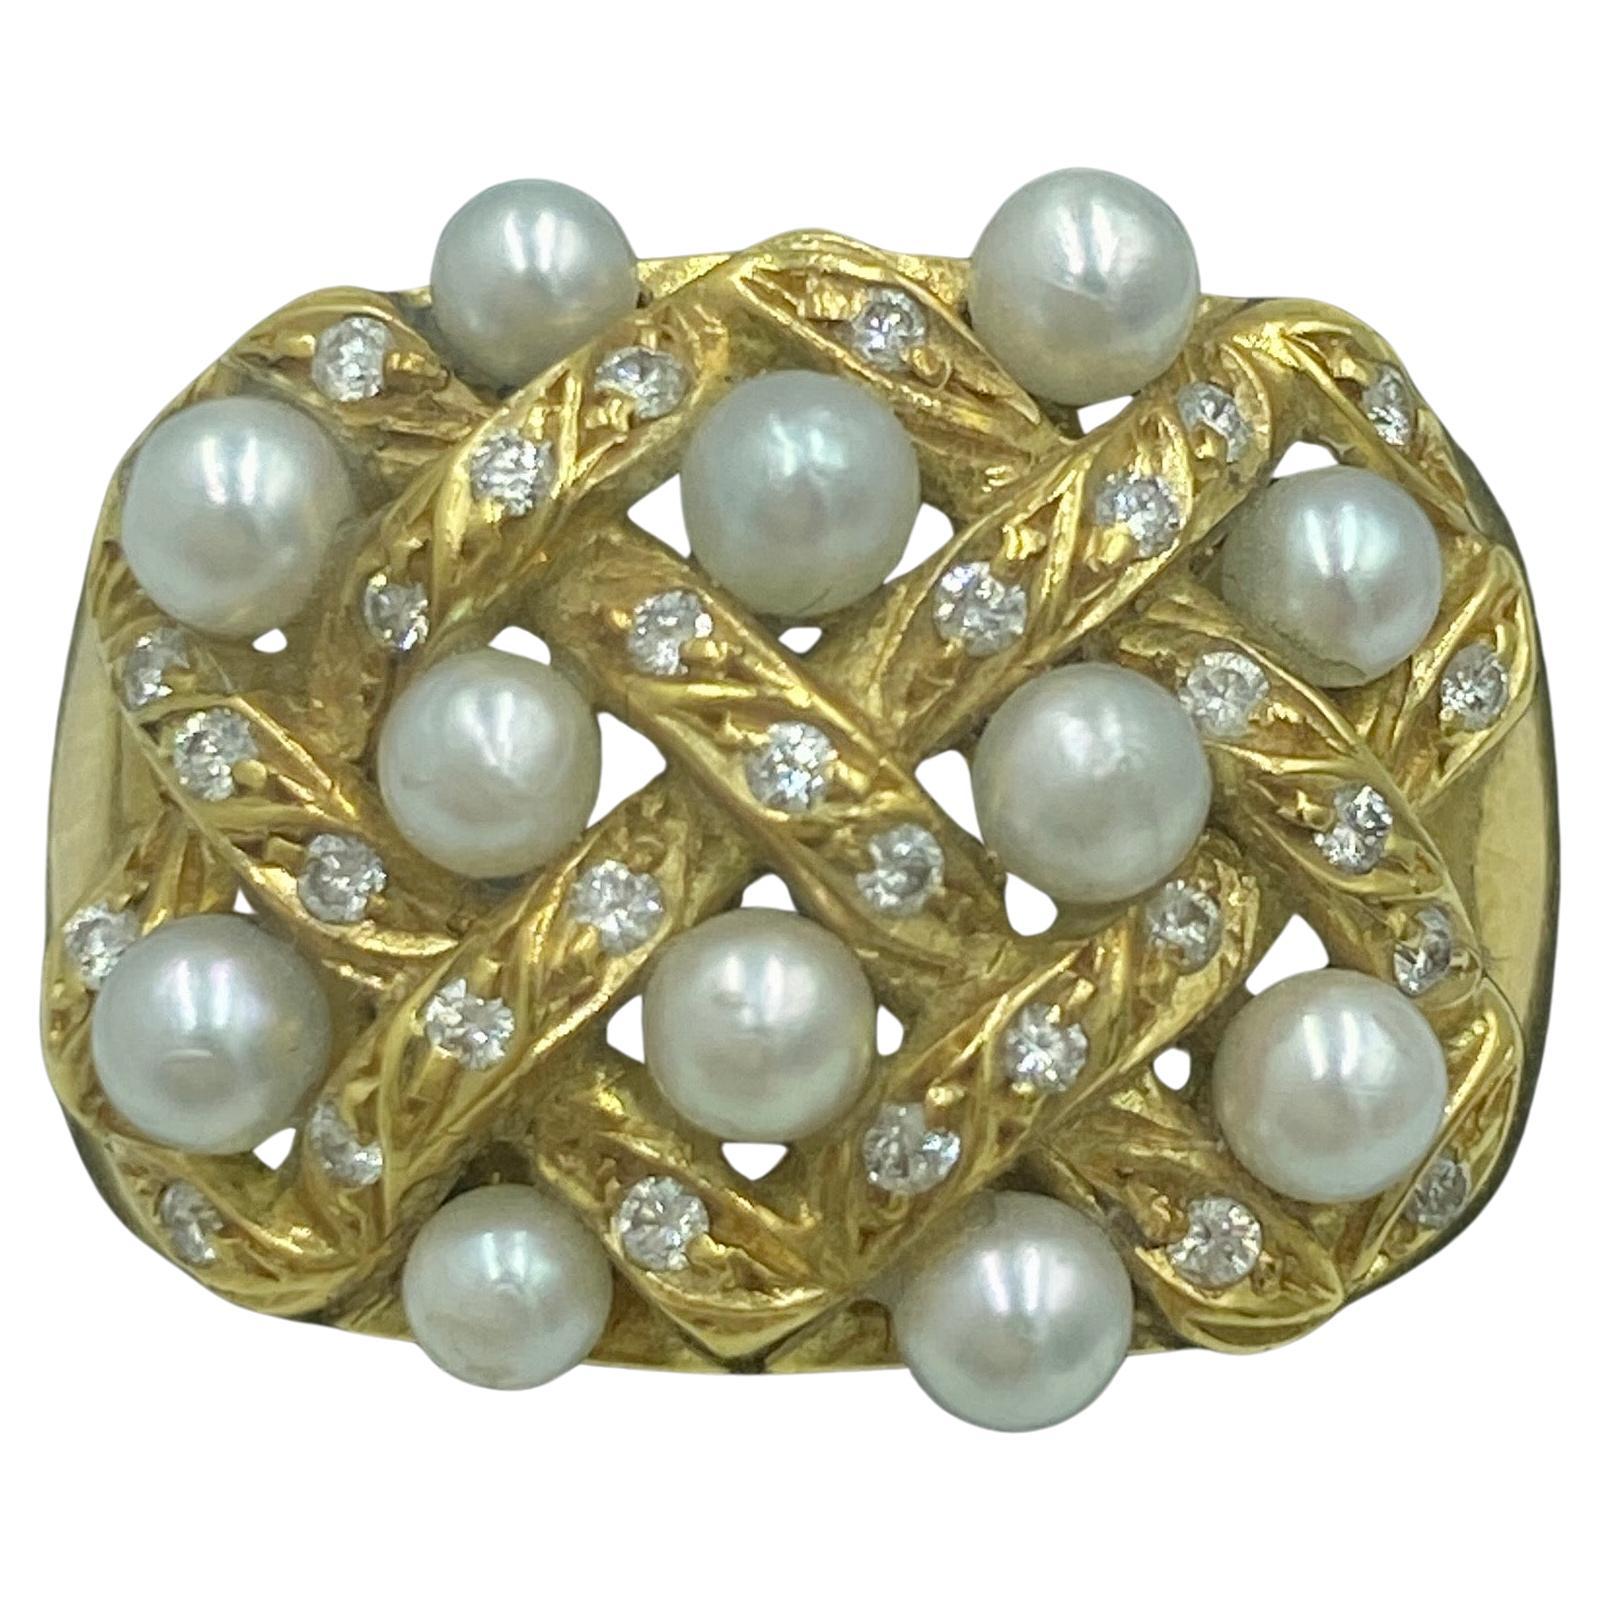 1970s Portuguese 19 karat gold, pearl and diamond cocktail ring